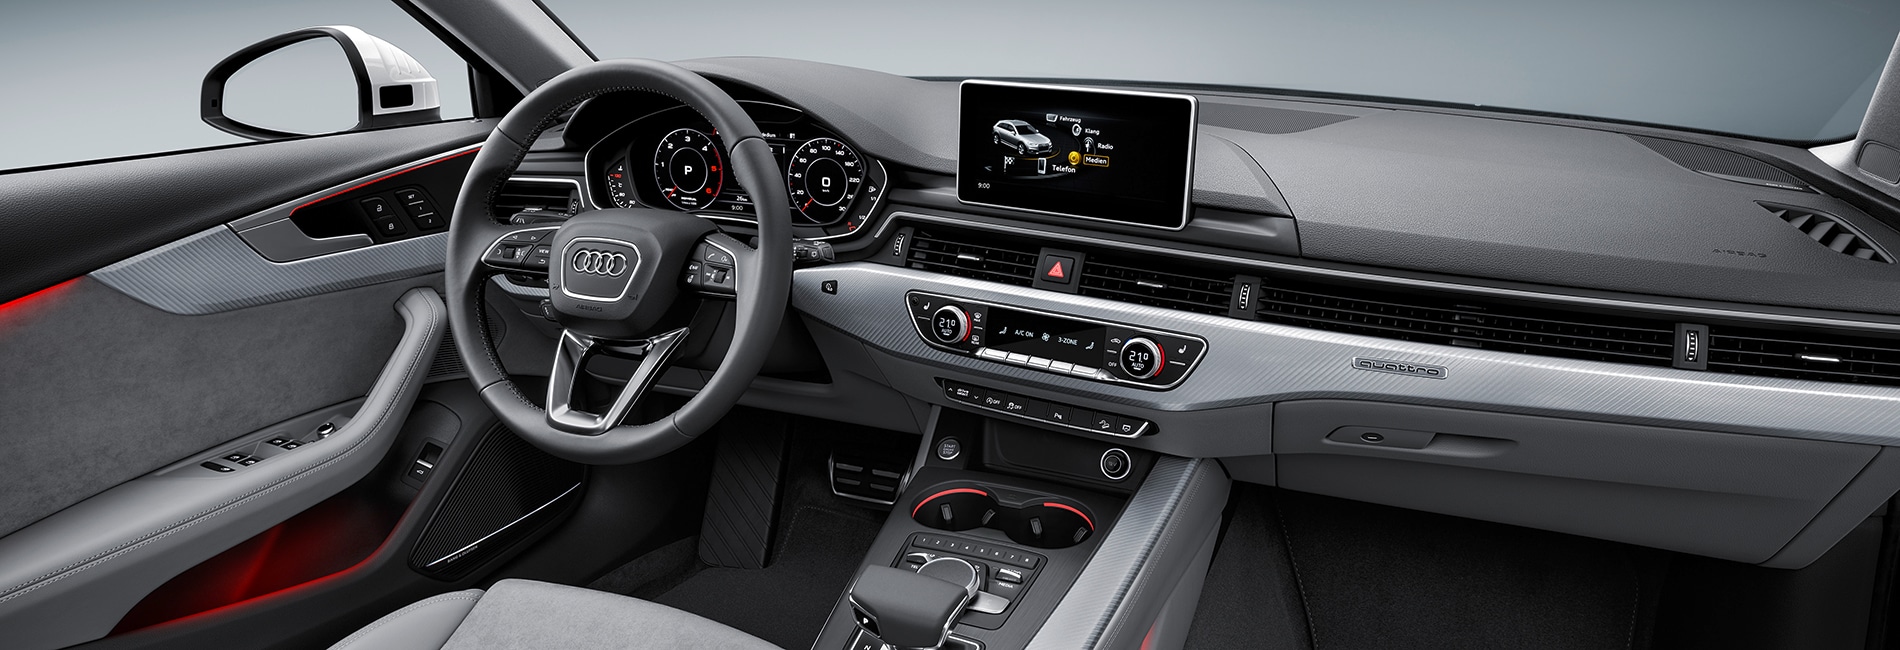 Audi A4 Allroad Interior Vehicle Features